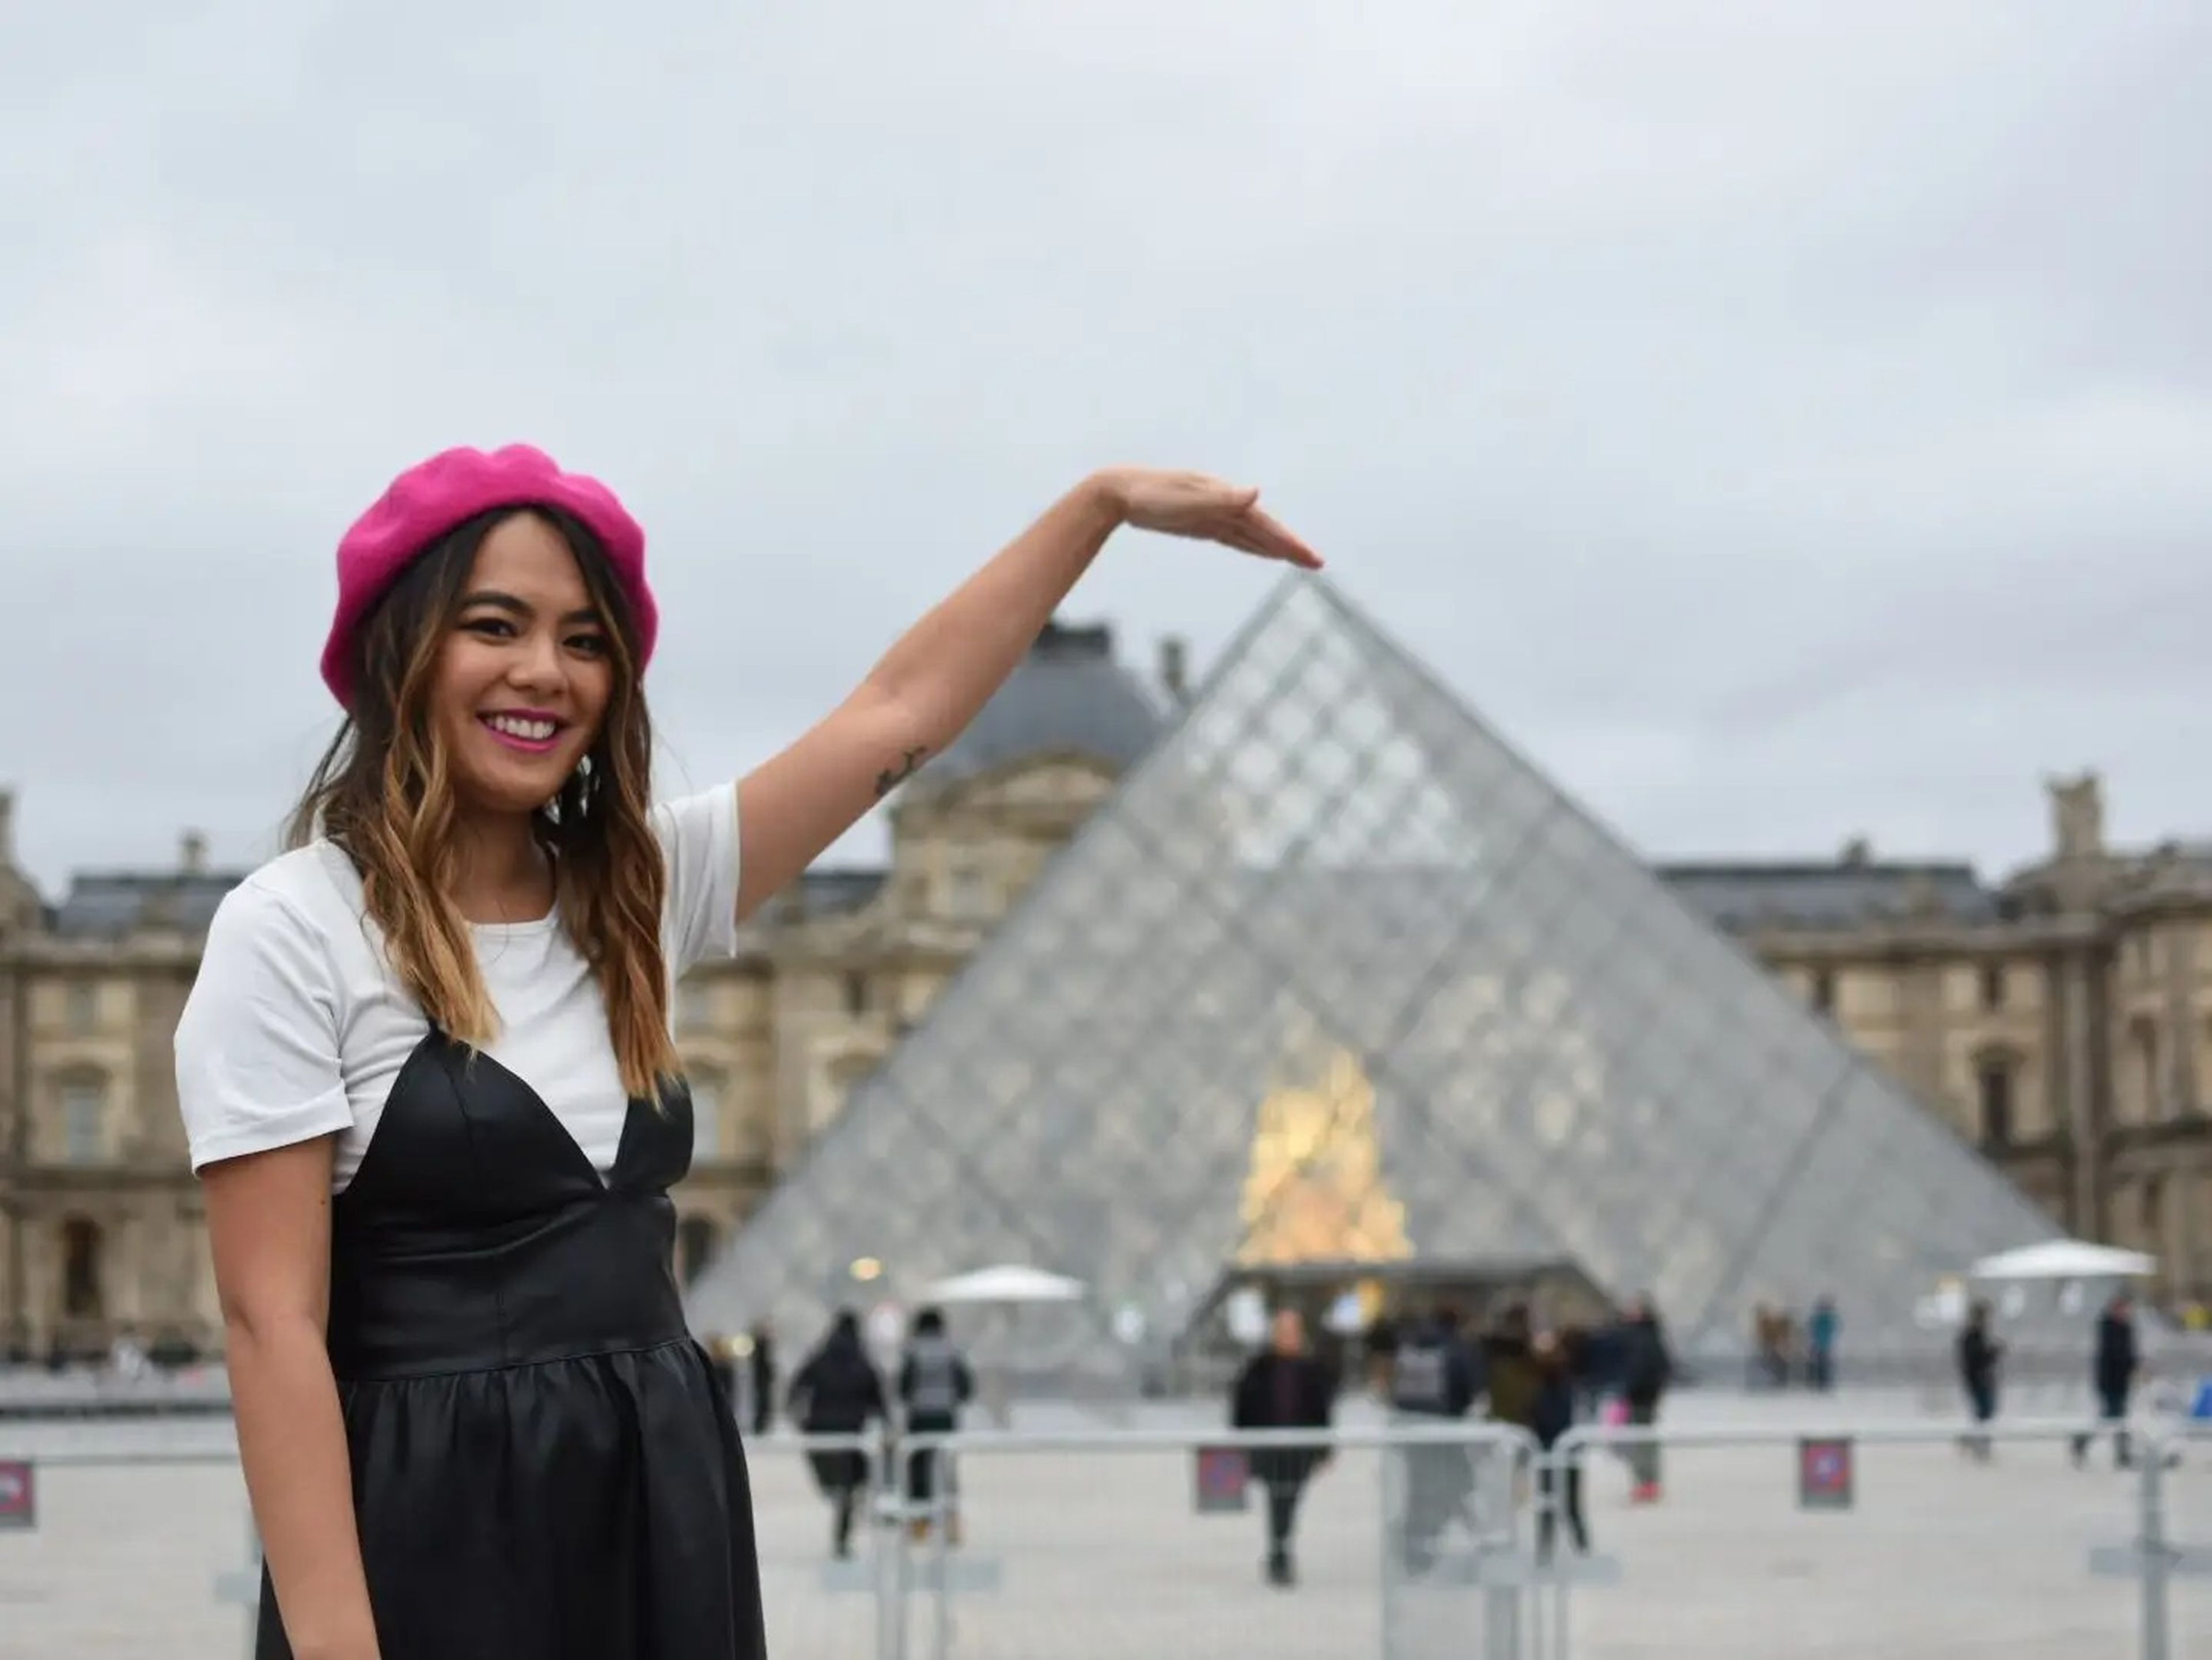 The author wearing a pink beret and a black dress over a white shirt. She is posing in front of the Louvre.